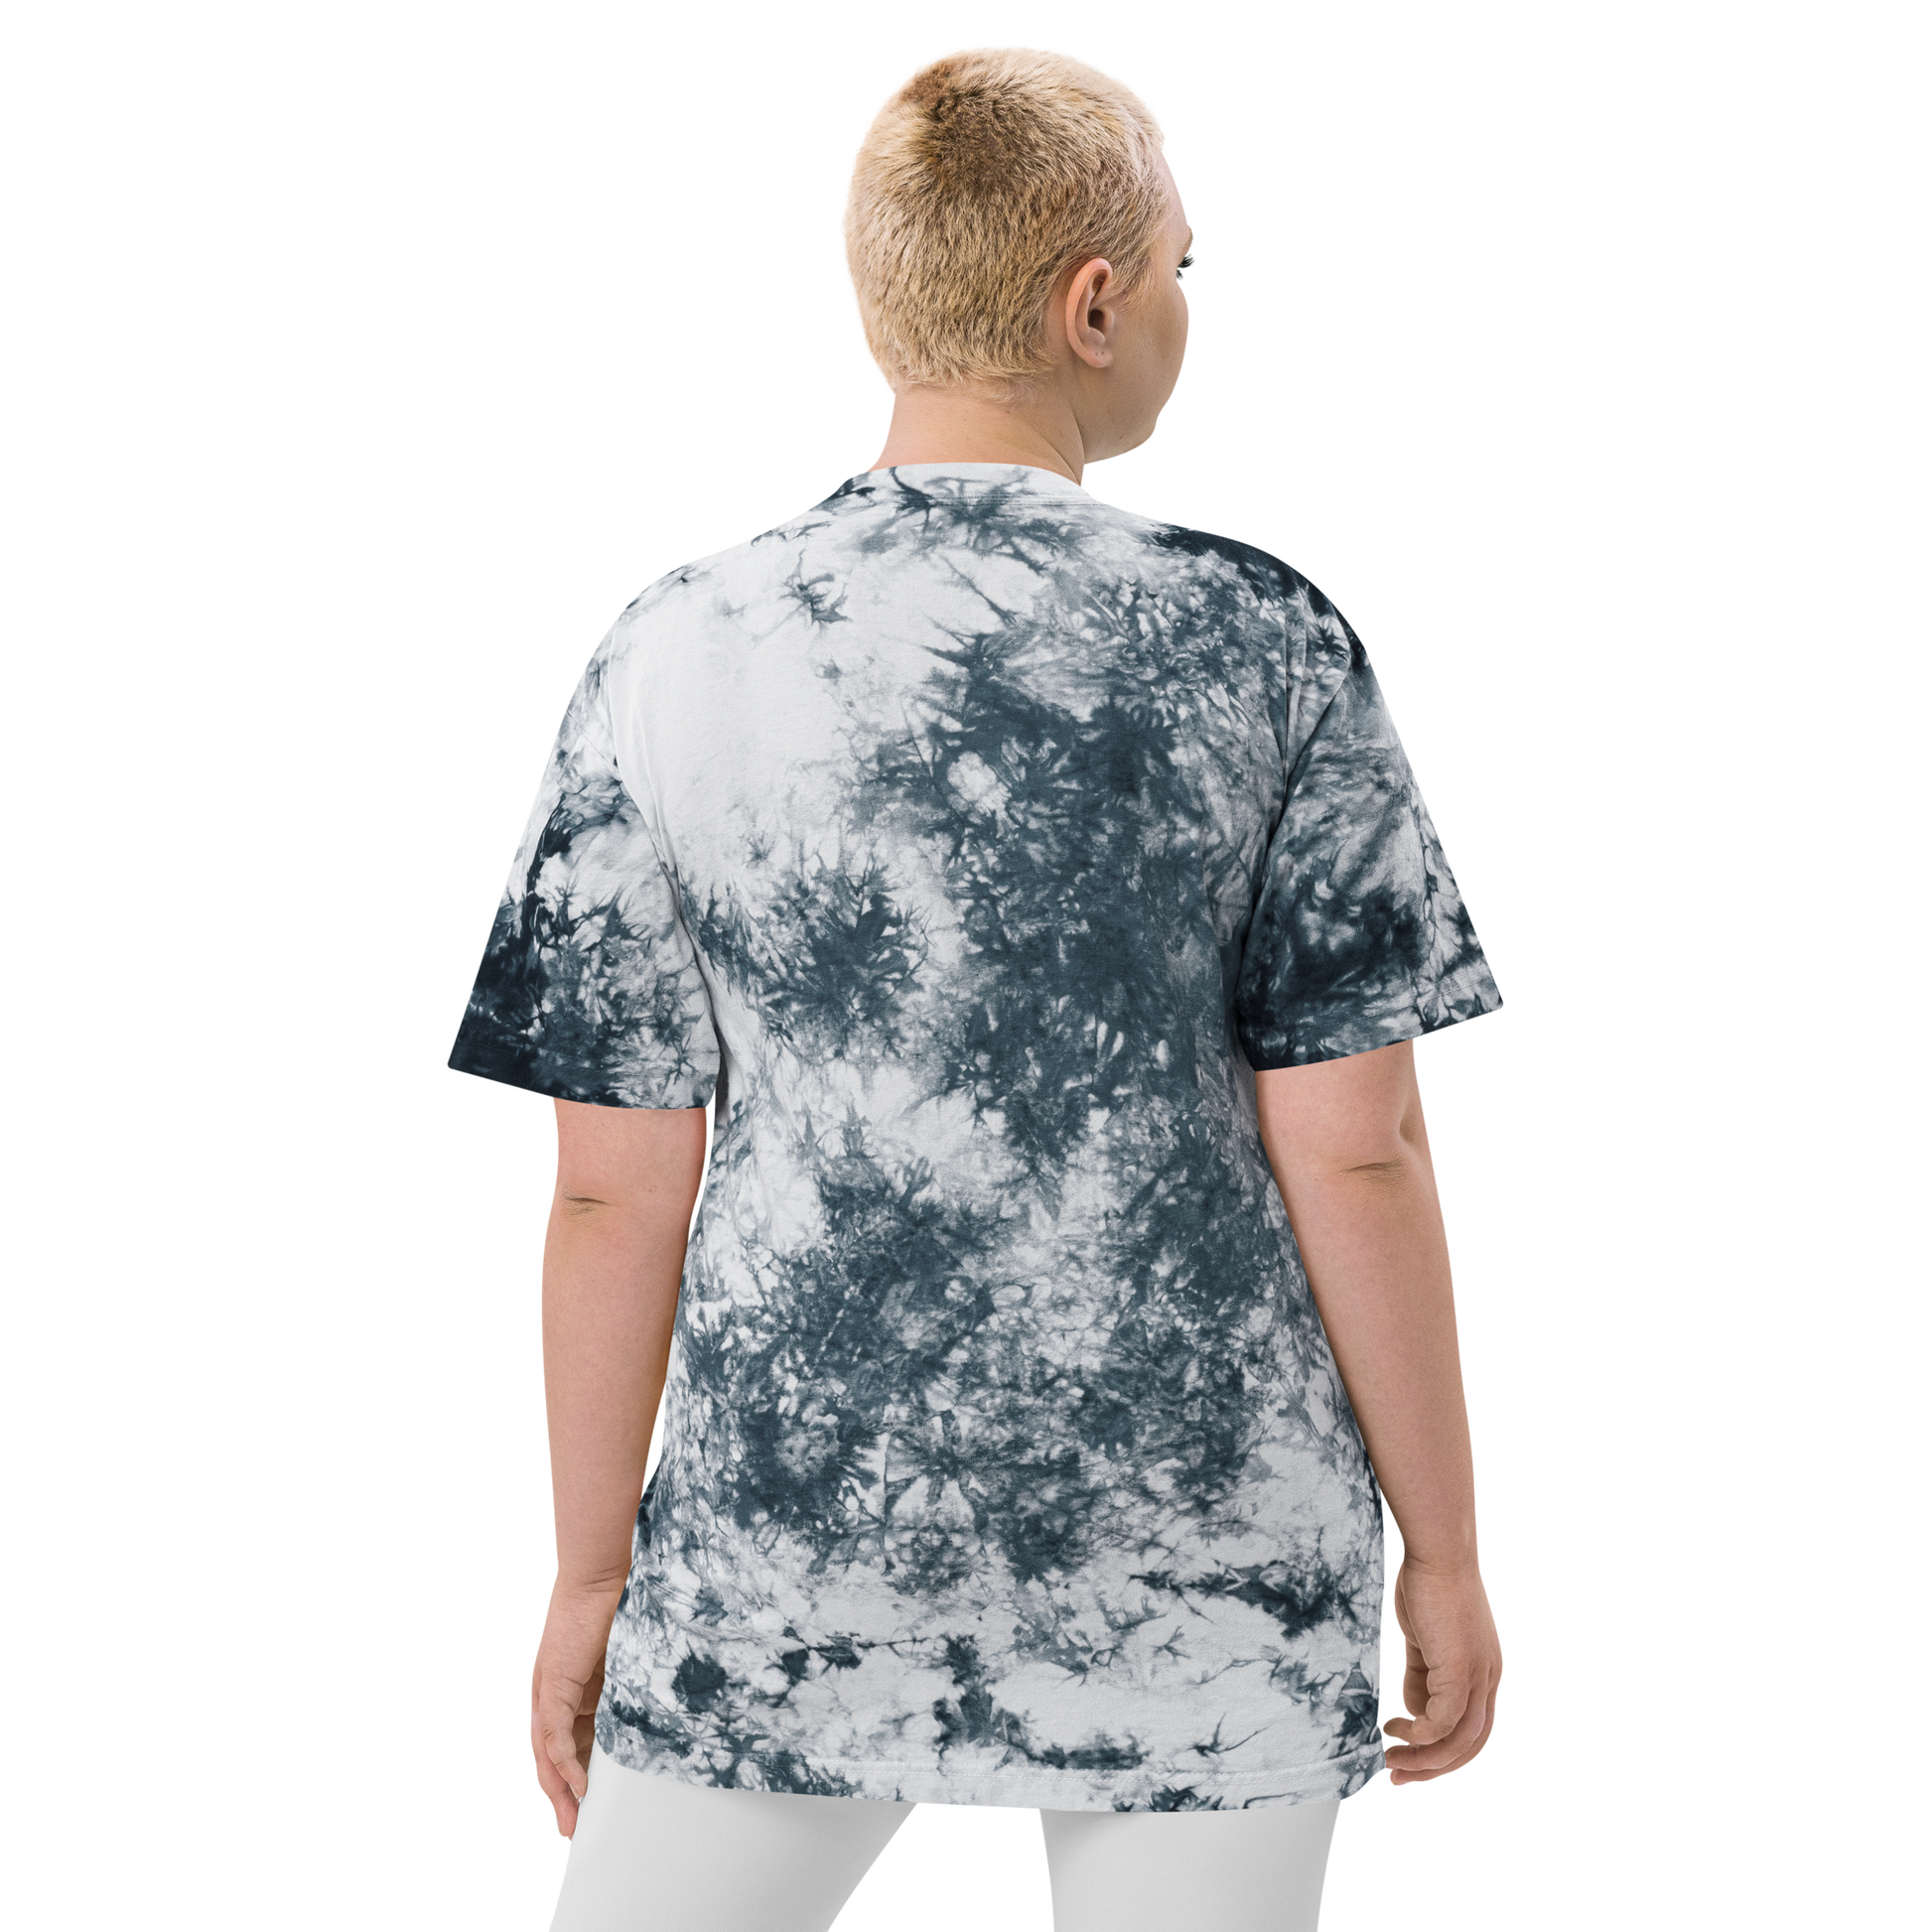 Crossed-X Oversized Tie-Dye T-Shirt • YQB Quebec City • YHM Designs - Image 17